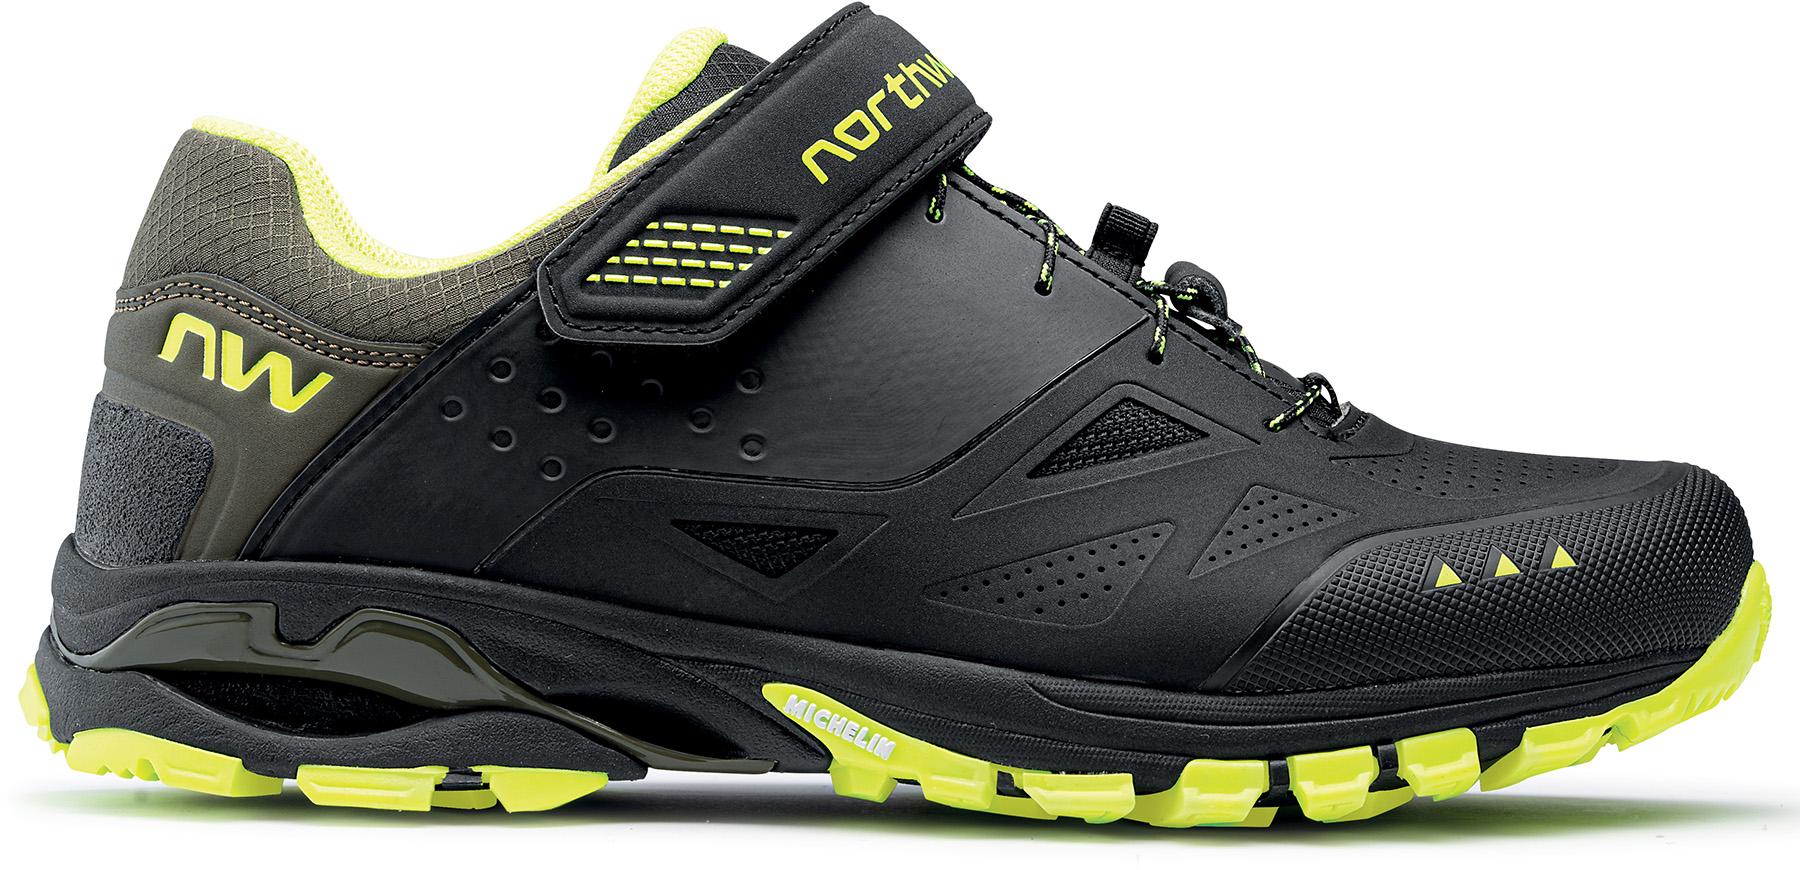 Northwave Spider 3 Mtb Shoes - Black/yellow